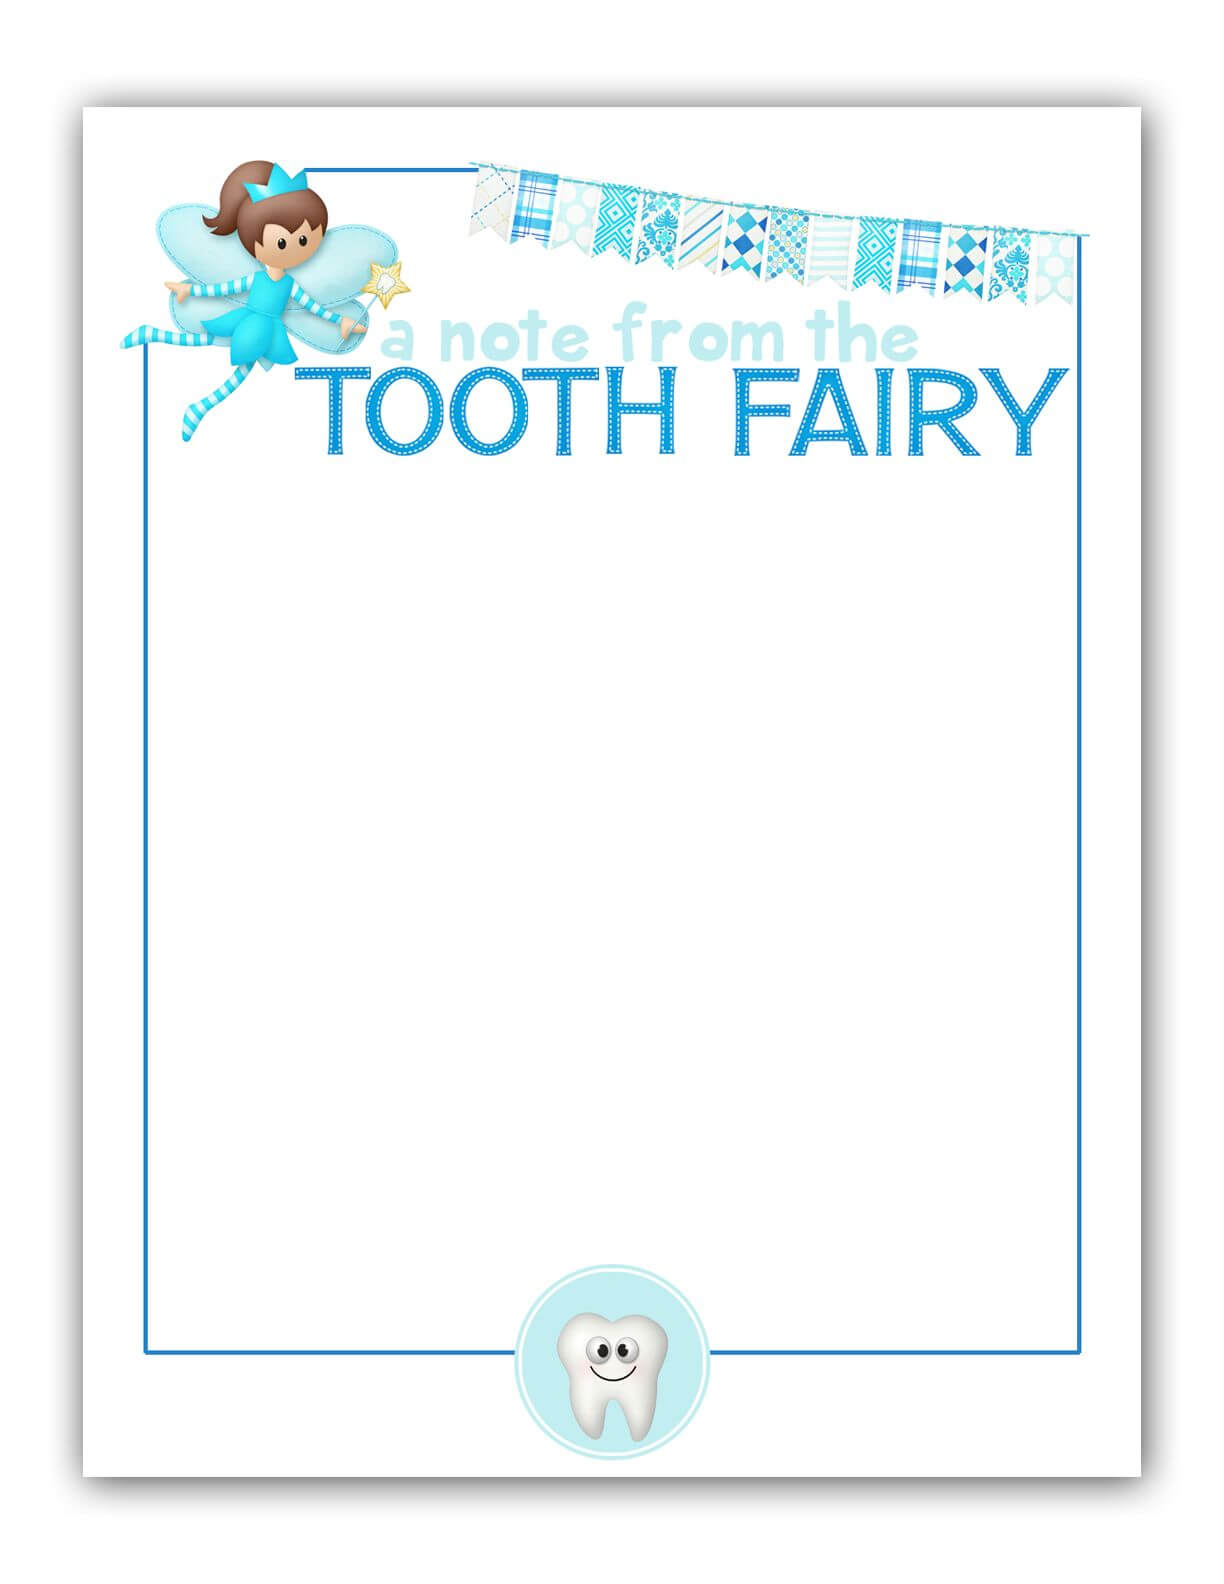 M|K Designs Blog: Tooth Fairy Stationary – Free Printable Regarding Free Tooth Fairy Certificate Template